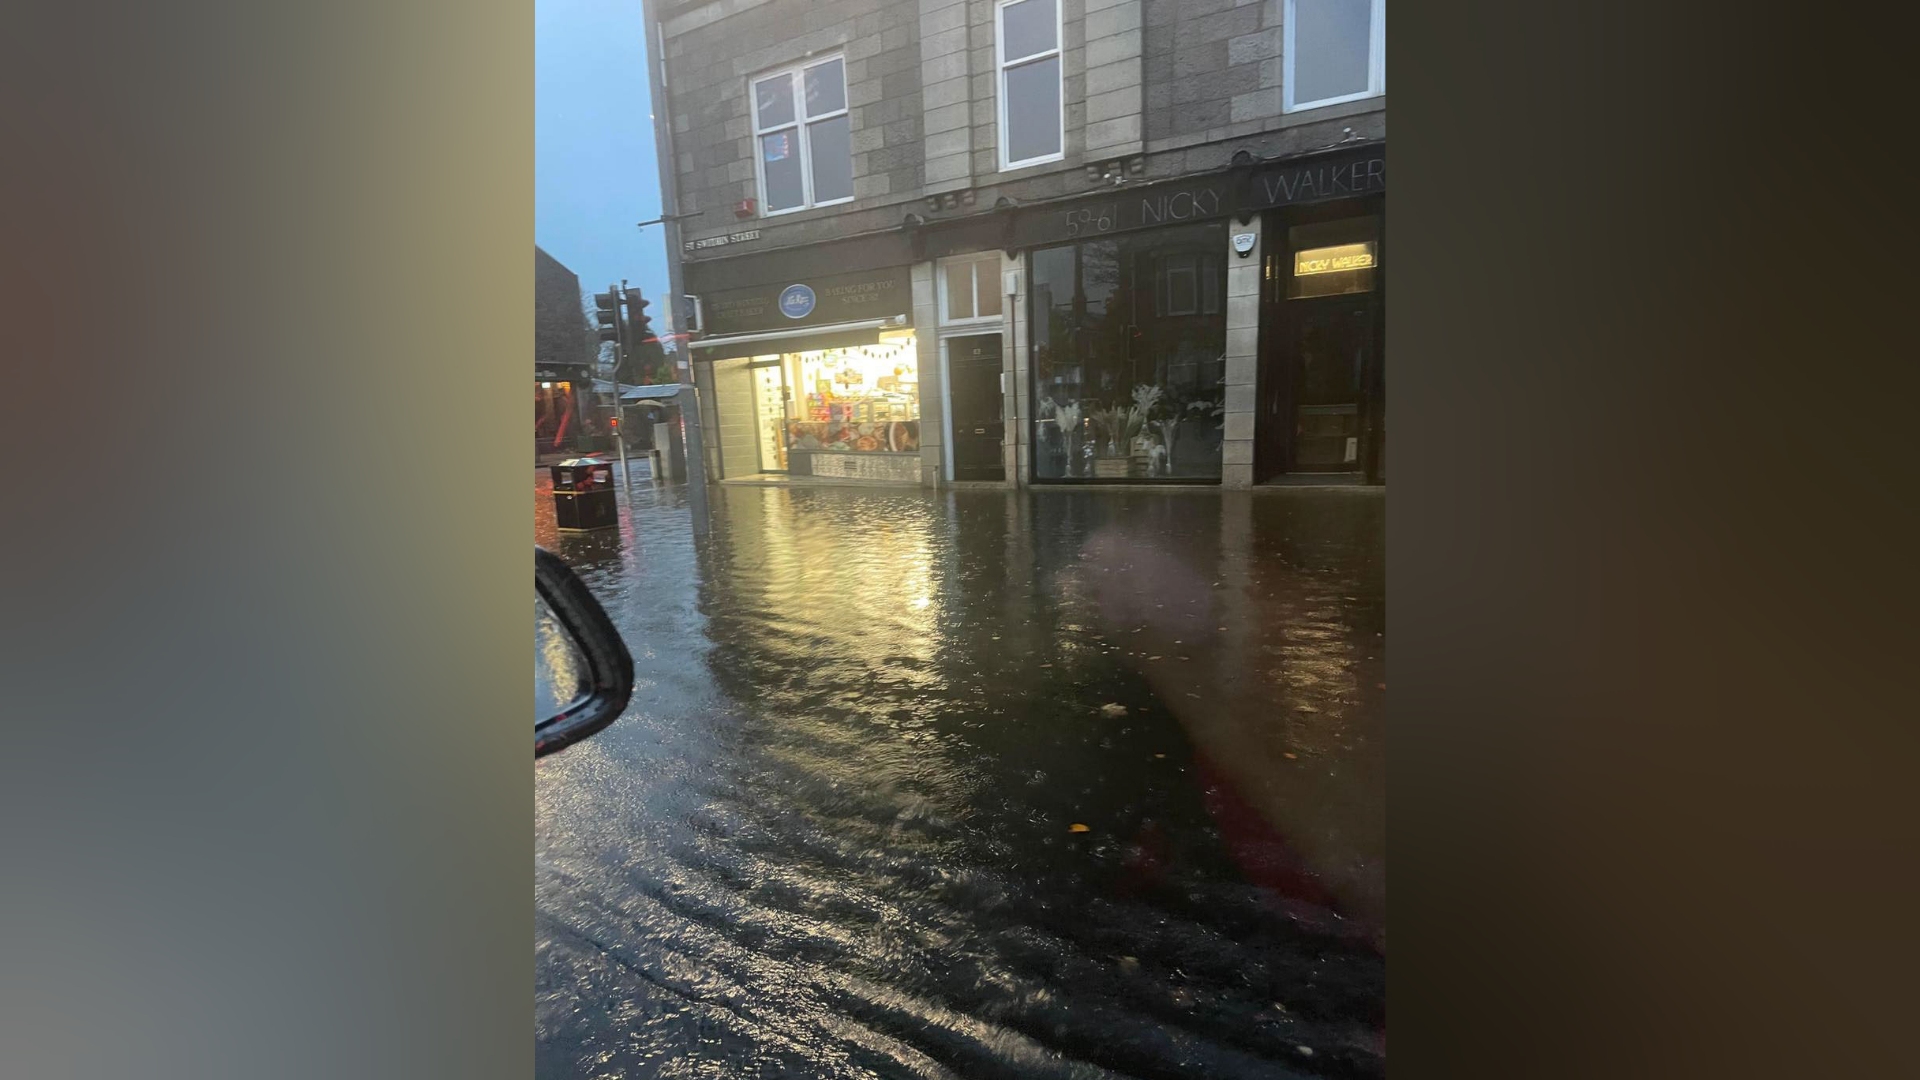 Flooding on St Swithin Street at the junction with Union Grove. (Fubar News)